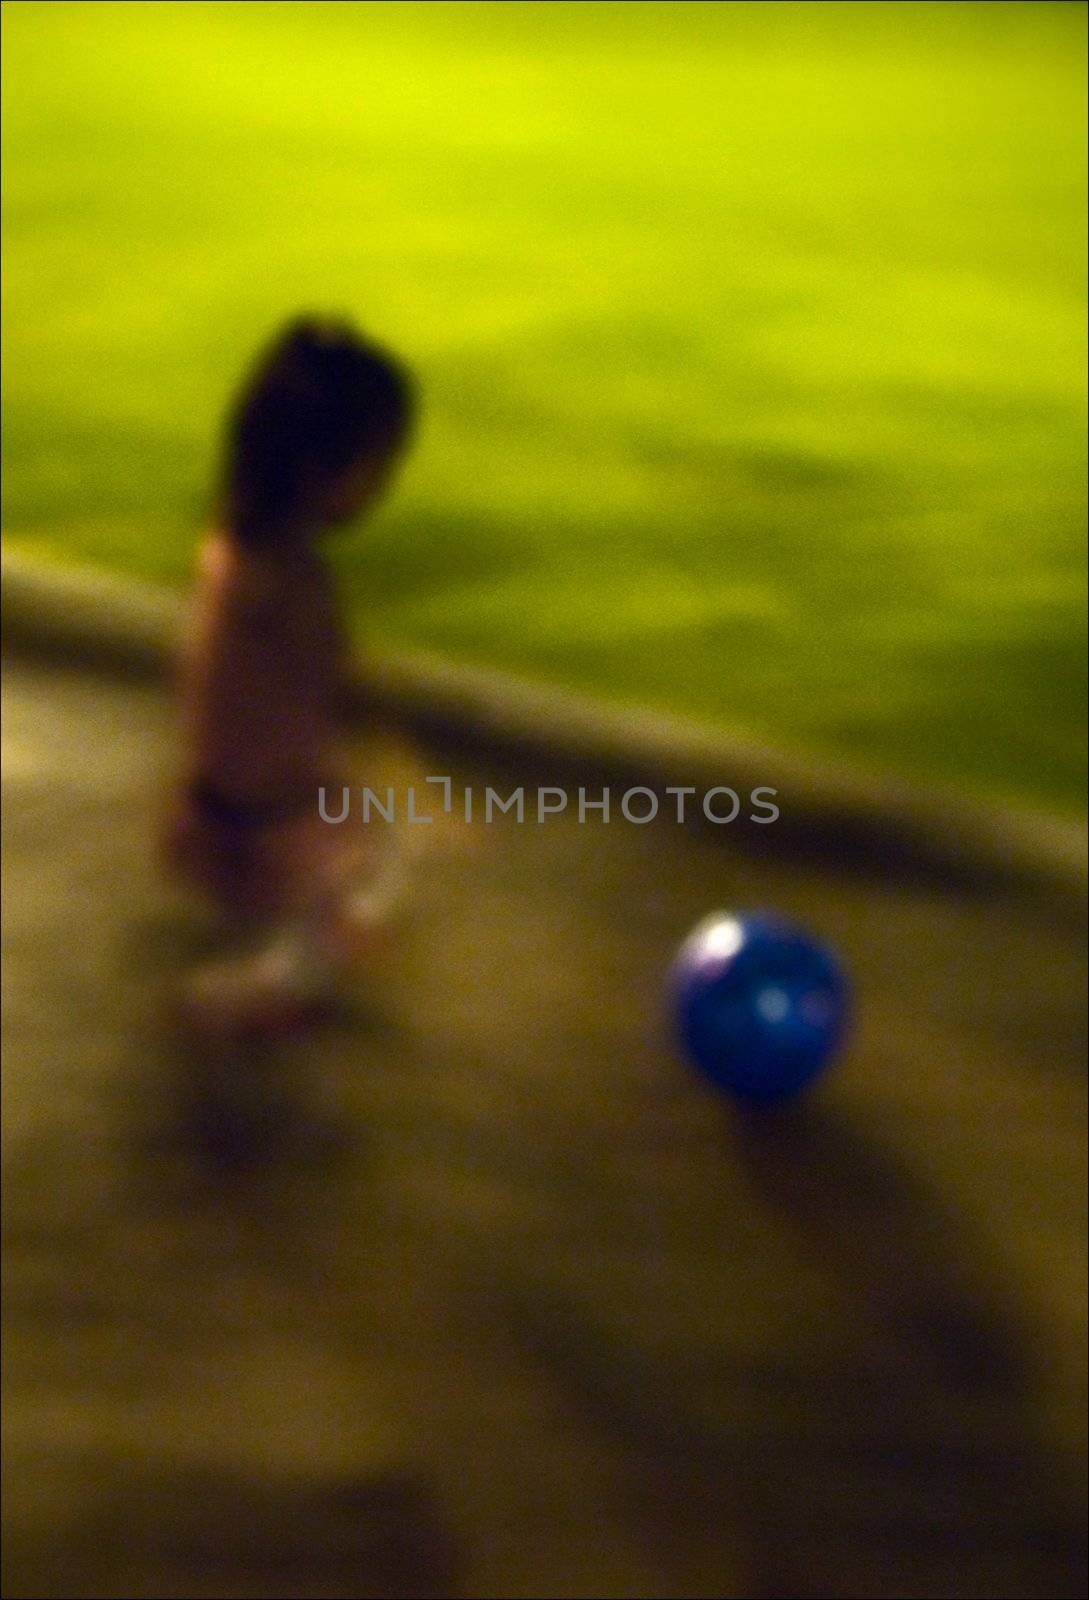 The girl and a ball. The little girl plays park a ball late at night.